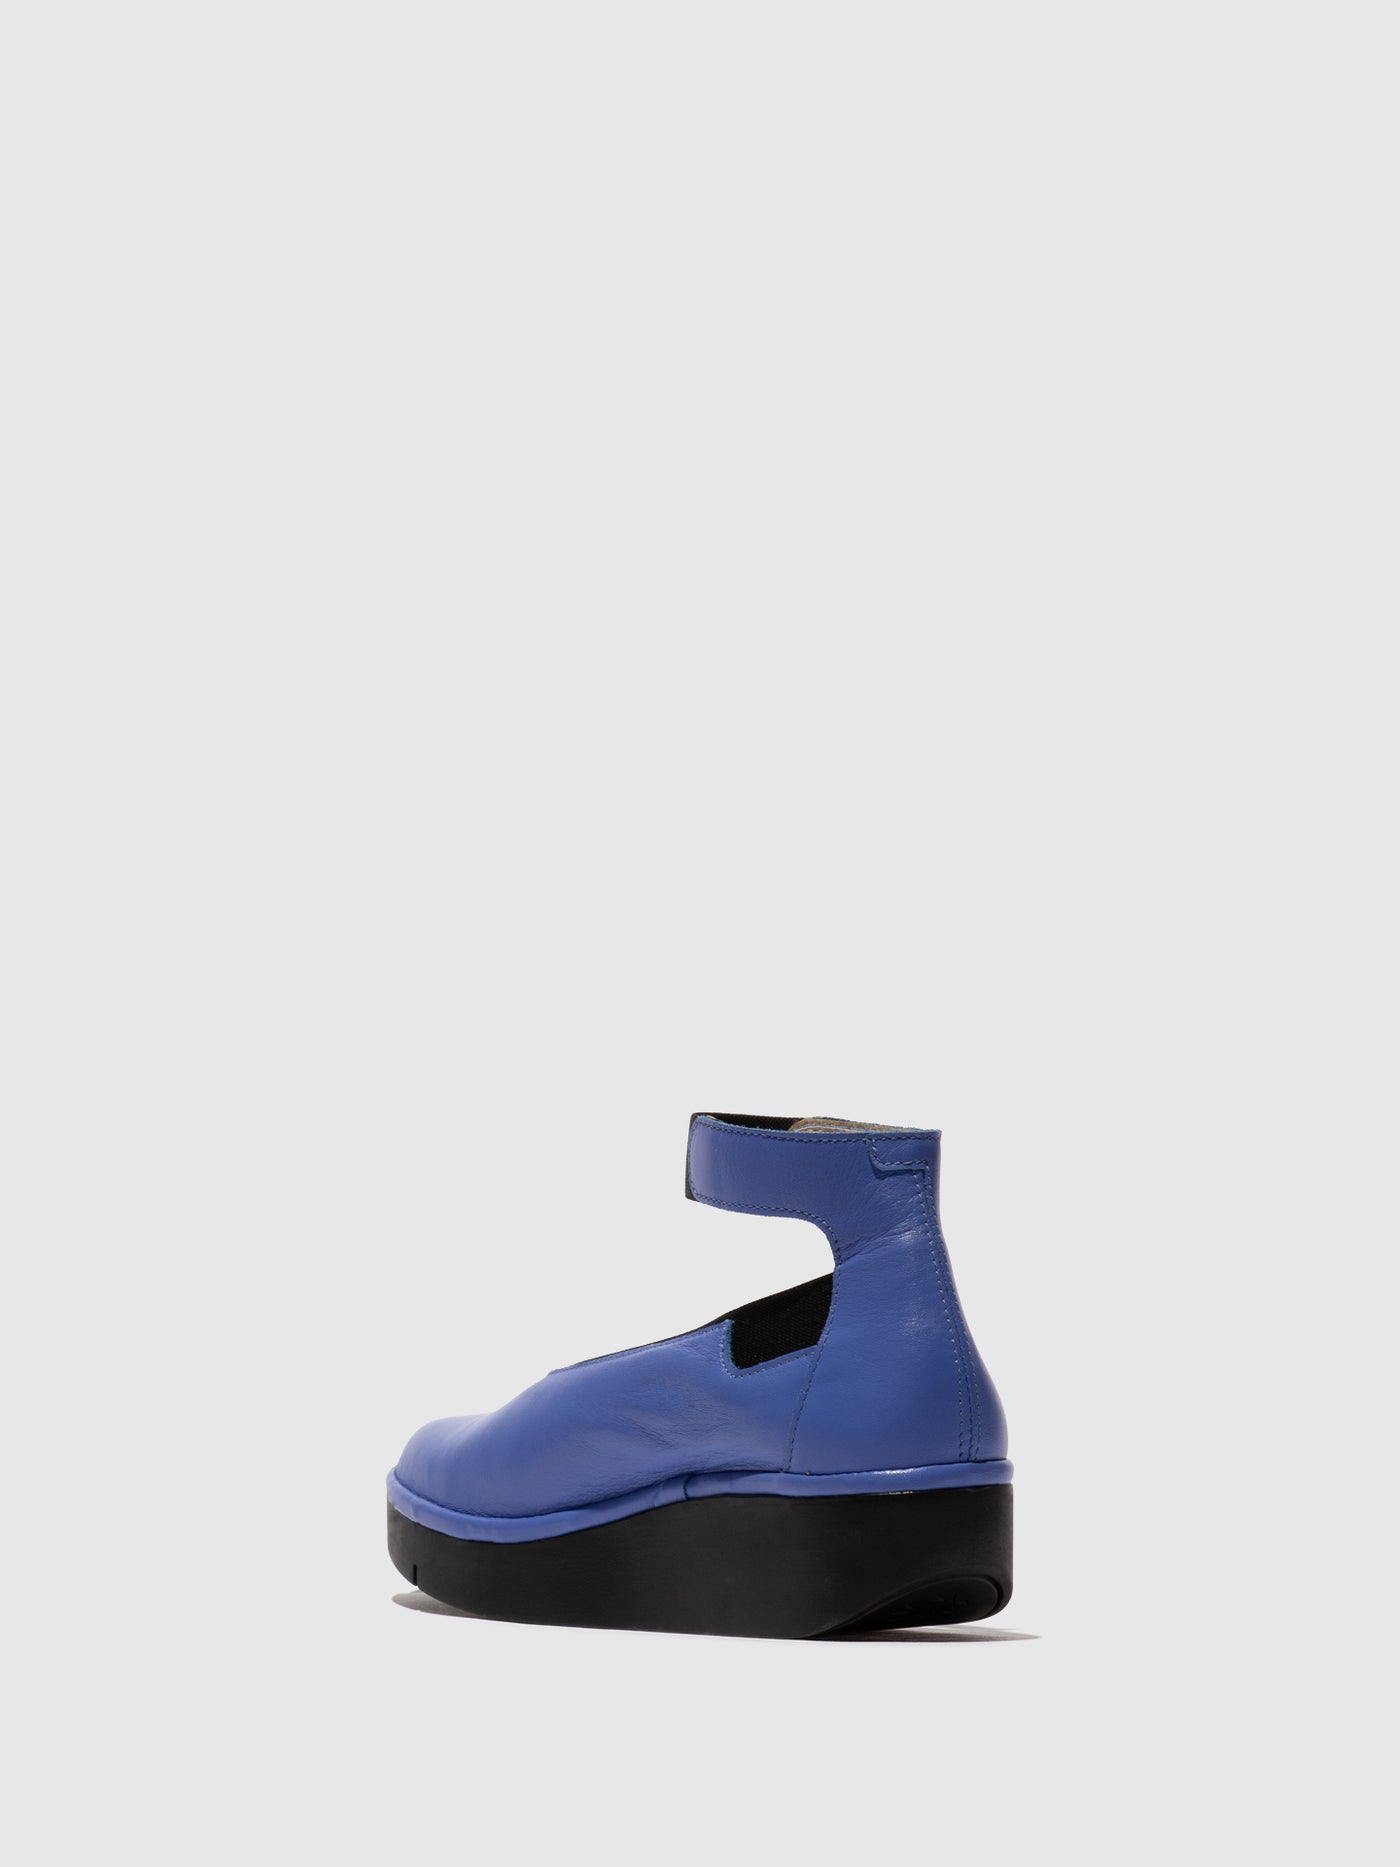 Ankle Strap Shoes JOZI499FLY BLUE